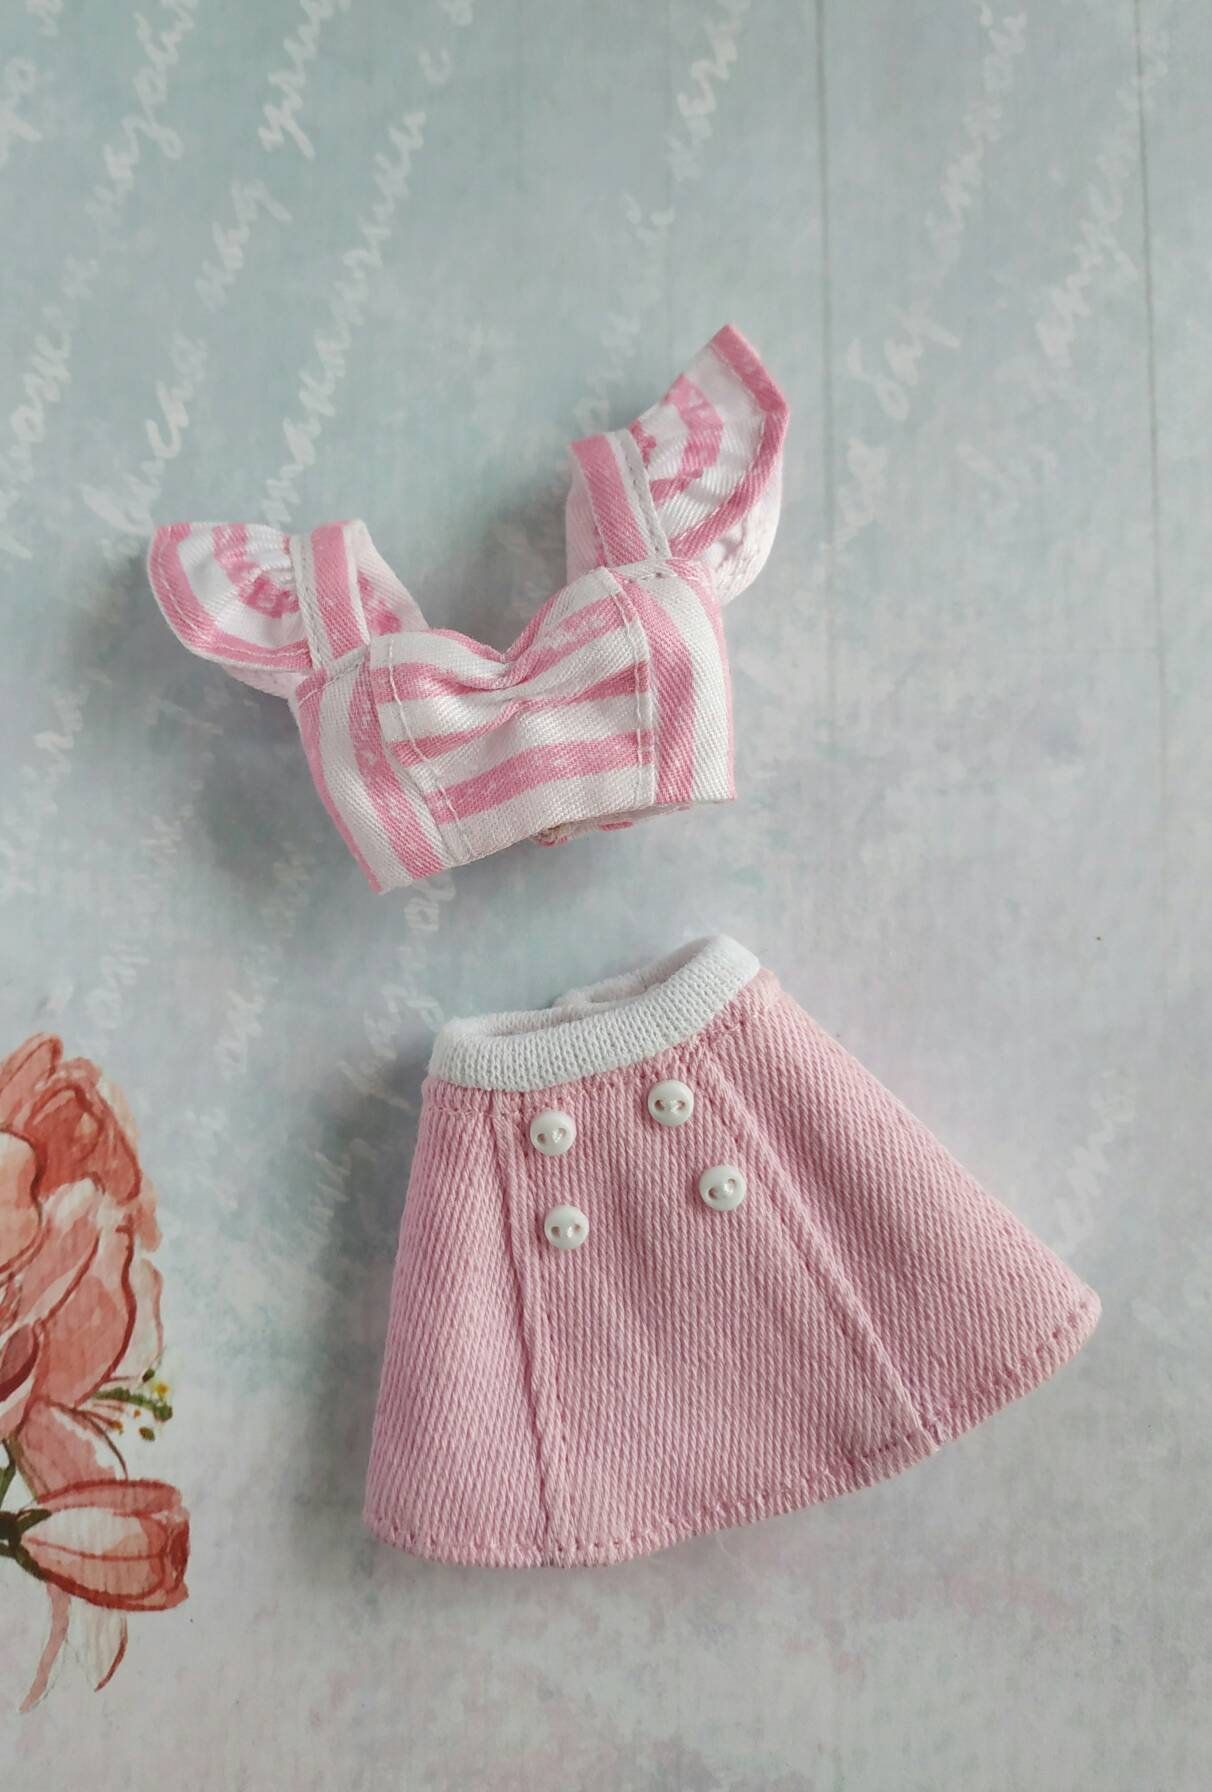 Items similar to Summer striped white pink crop top, pink denim skirt for Blythe doll, blythe clothes ithes outfit on Etsy -   14 DIY Clothes Skirt crop tops ideas